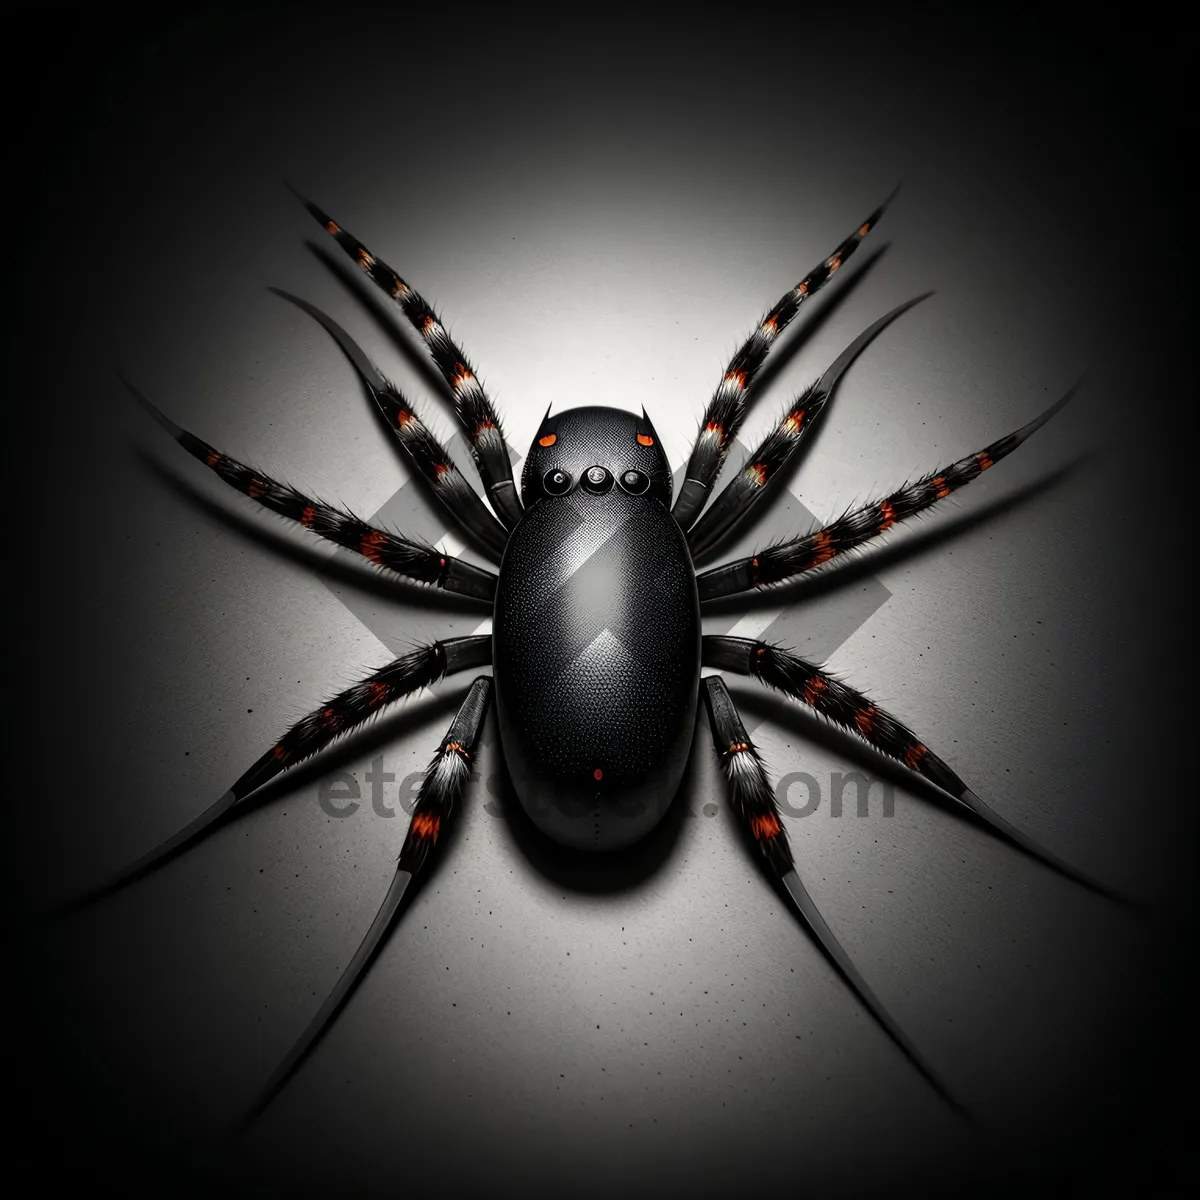 Picture of Black Widow Arachnid Close-up Image